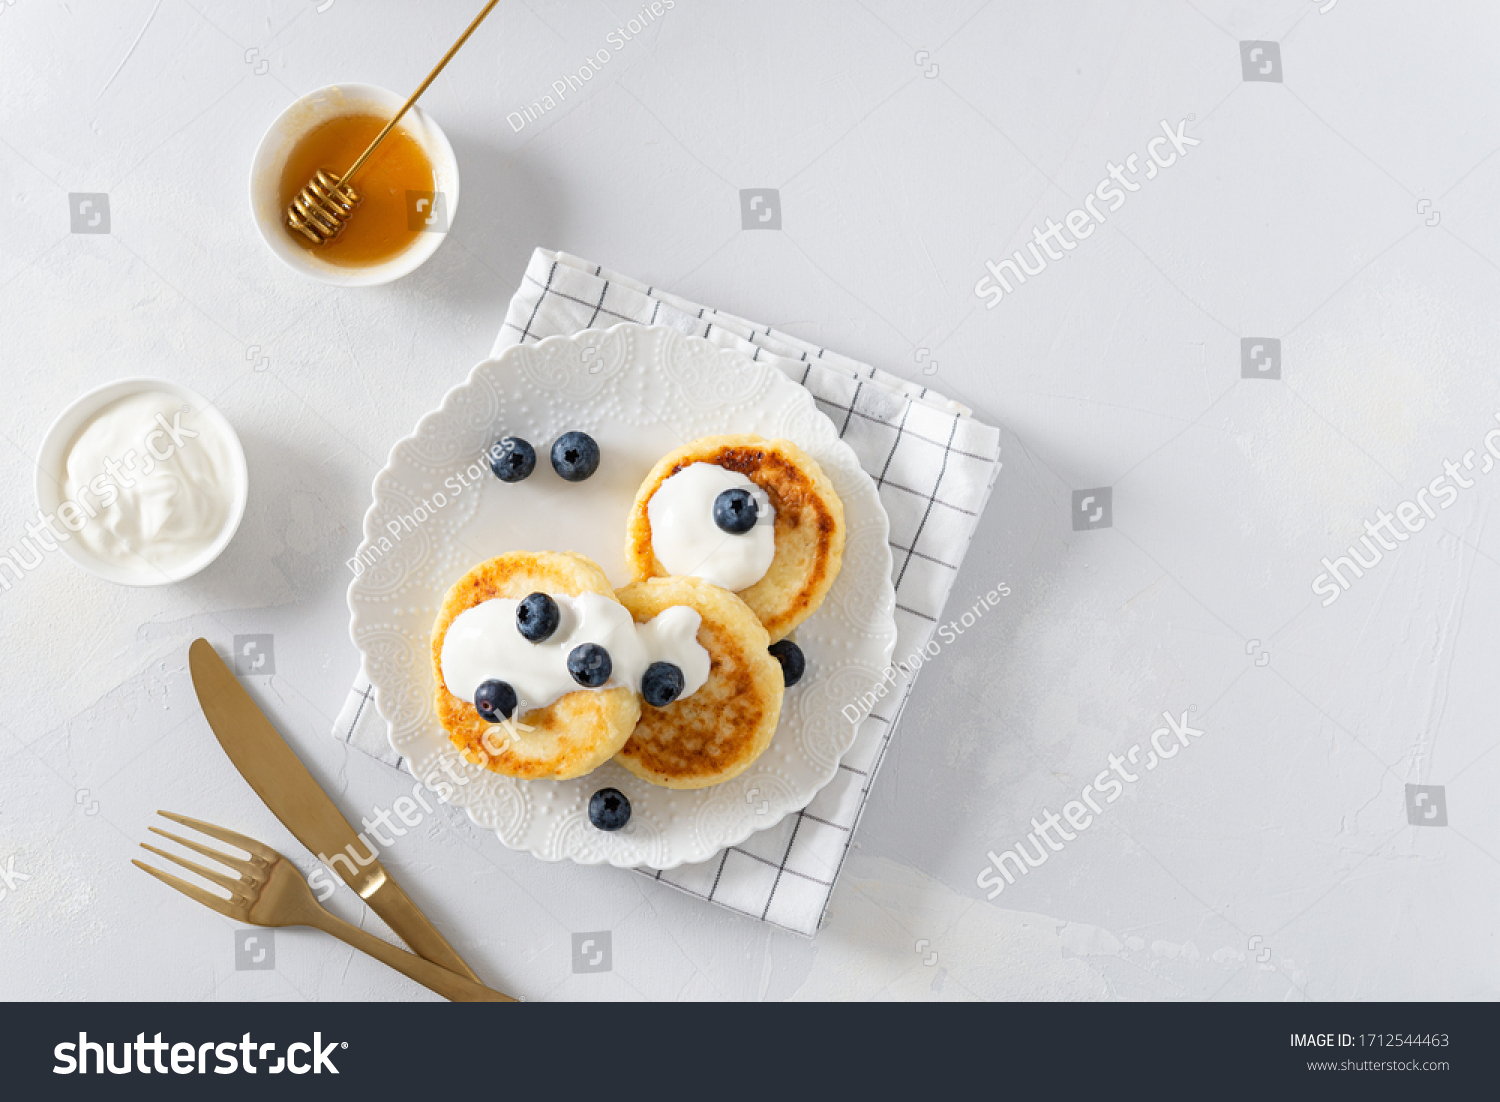 Cottage cheese pancakes on a white background. Syrniki with fresh blueberries. Pancakes with cottage cheese on a white board sprinkled with powdered sugar. Homemade food. Recipe. Copy space for text #1712544463